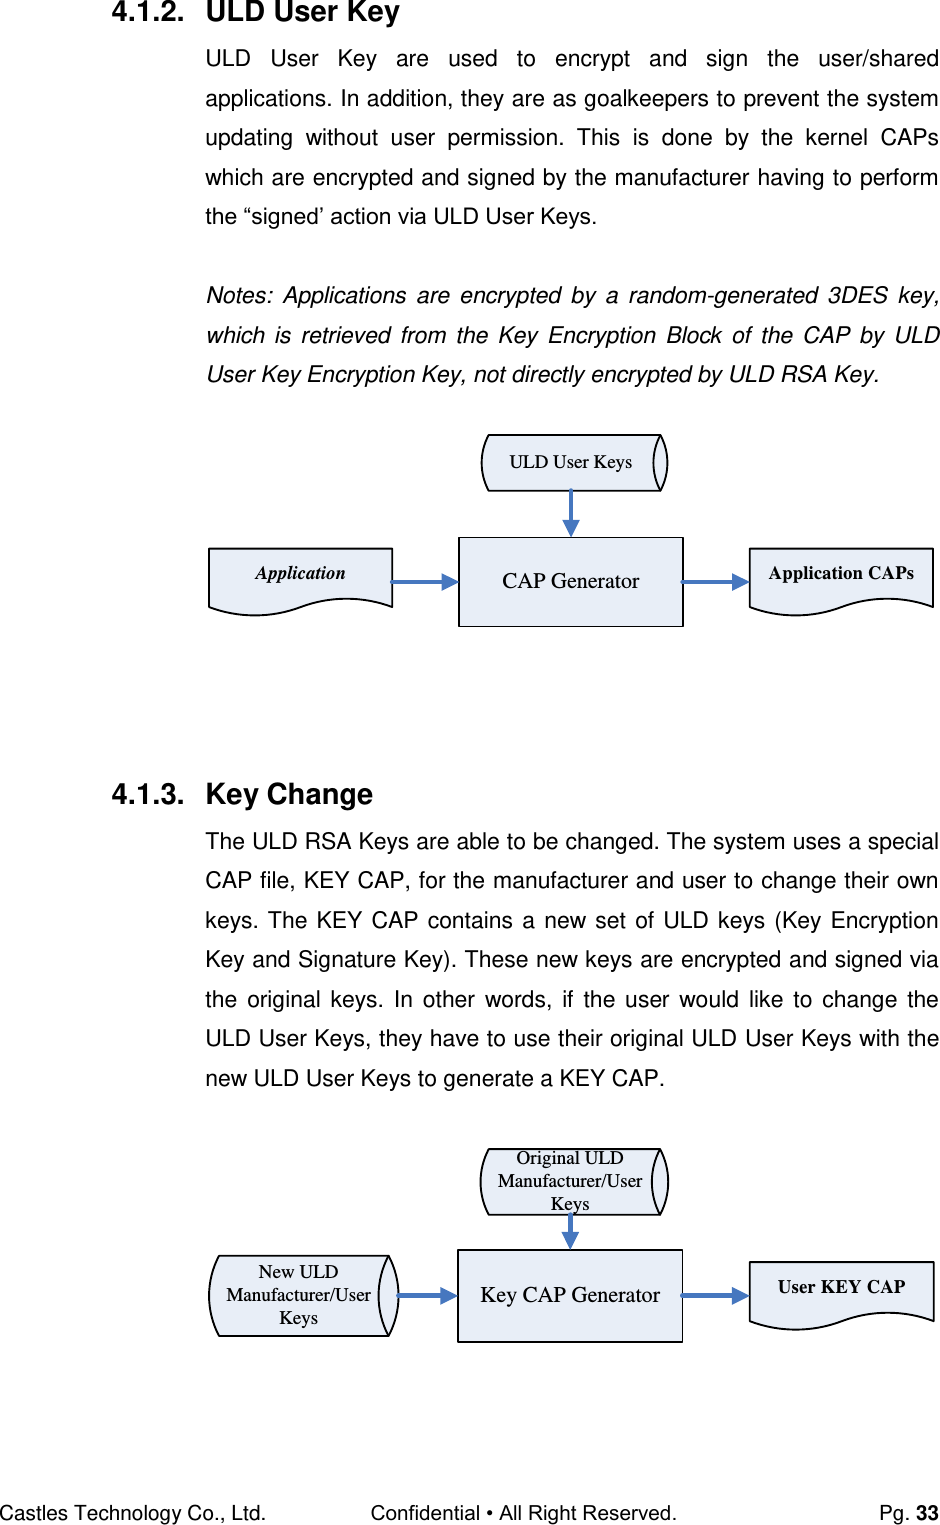 Castles Technology Co., Ltd. Confidential • All Right Reserved.  Pg. 33 4.1.2.  ULD User Key ULD  User  Key  are  used  to  encrypt  and  sign  the  user/shared applications. In addition, they are as goalkeepers to prevent the system updating  without  user  permission.  This  is  done  by  the  kernel  CAPs which are encrypted and signed by the manufacturer having to perform the “signed’ action via ULD User Keys.  Notes:  Applications  are  encrypted  by  a  random-generated  3DES  key, which is retrieved  from the  Key Encryption Block  of the  CAP by  ULD User Key Encryption Key, not directly encrypted by ULD RSA Key.  Application Application CAPsULD User KeysCAP Generator     4.1.3.  Key Change The ULD RSA Keys are able to be changed. The system uses a special CAP file, KEY CAP, for the manufacturer and user to change their own keys. The KEY CAP contains a new set of ULD keys (Key Encryption Key and Signature Key). These new keys are encrypted and signed via the  original keys.  In other  words, if  the  user would like  to  change the ULD User Keys, they have to use their original ULD User Keys with the new ULD User Keys to generate a KEY CAP.  Key CAP GeneratorOriginal ULD Manufacturer/User KeysNew ULD Manufacturer/User KeysUser KEY CAP    